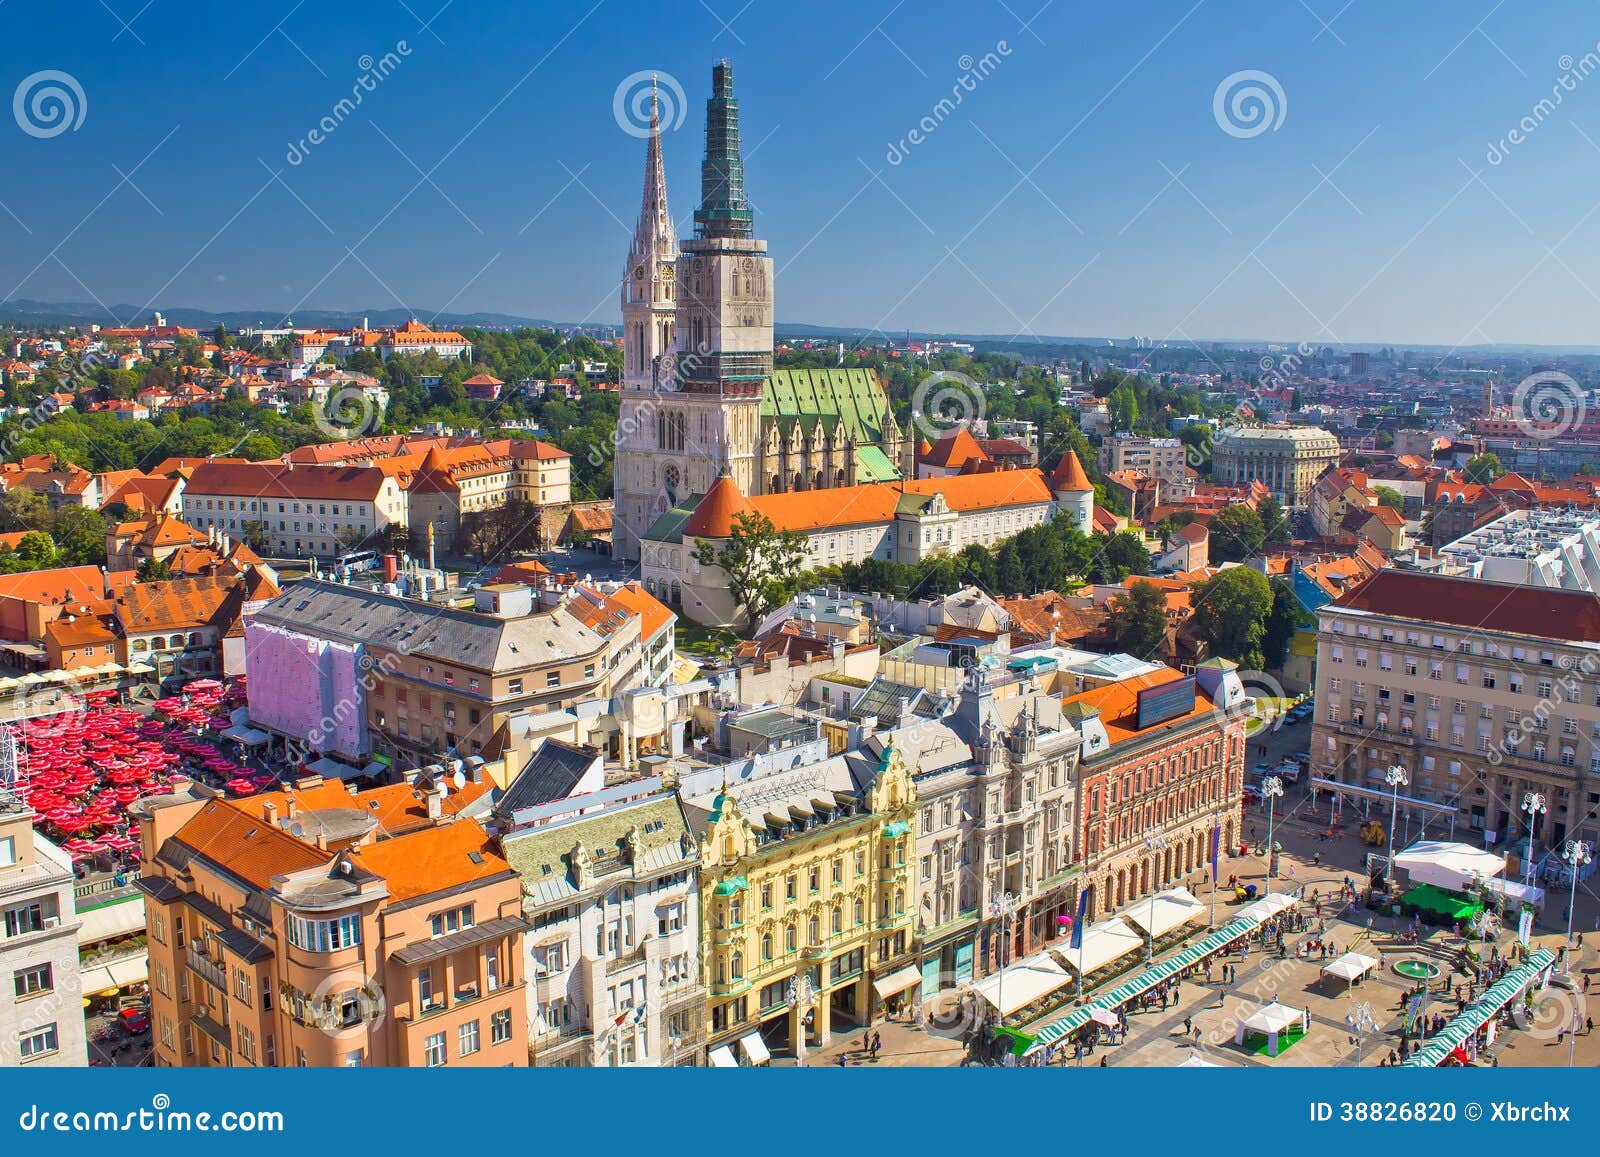 zagreb main square and cathedral aerial view